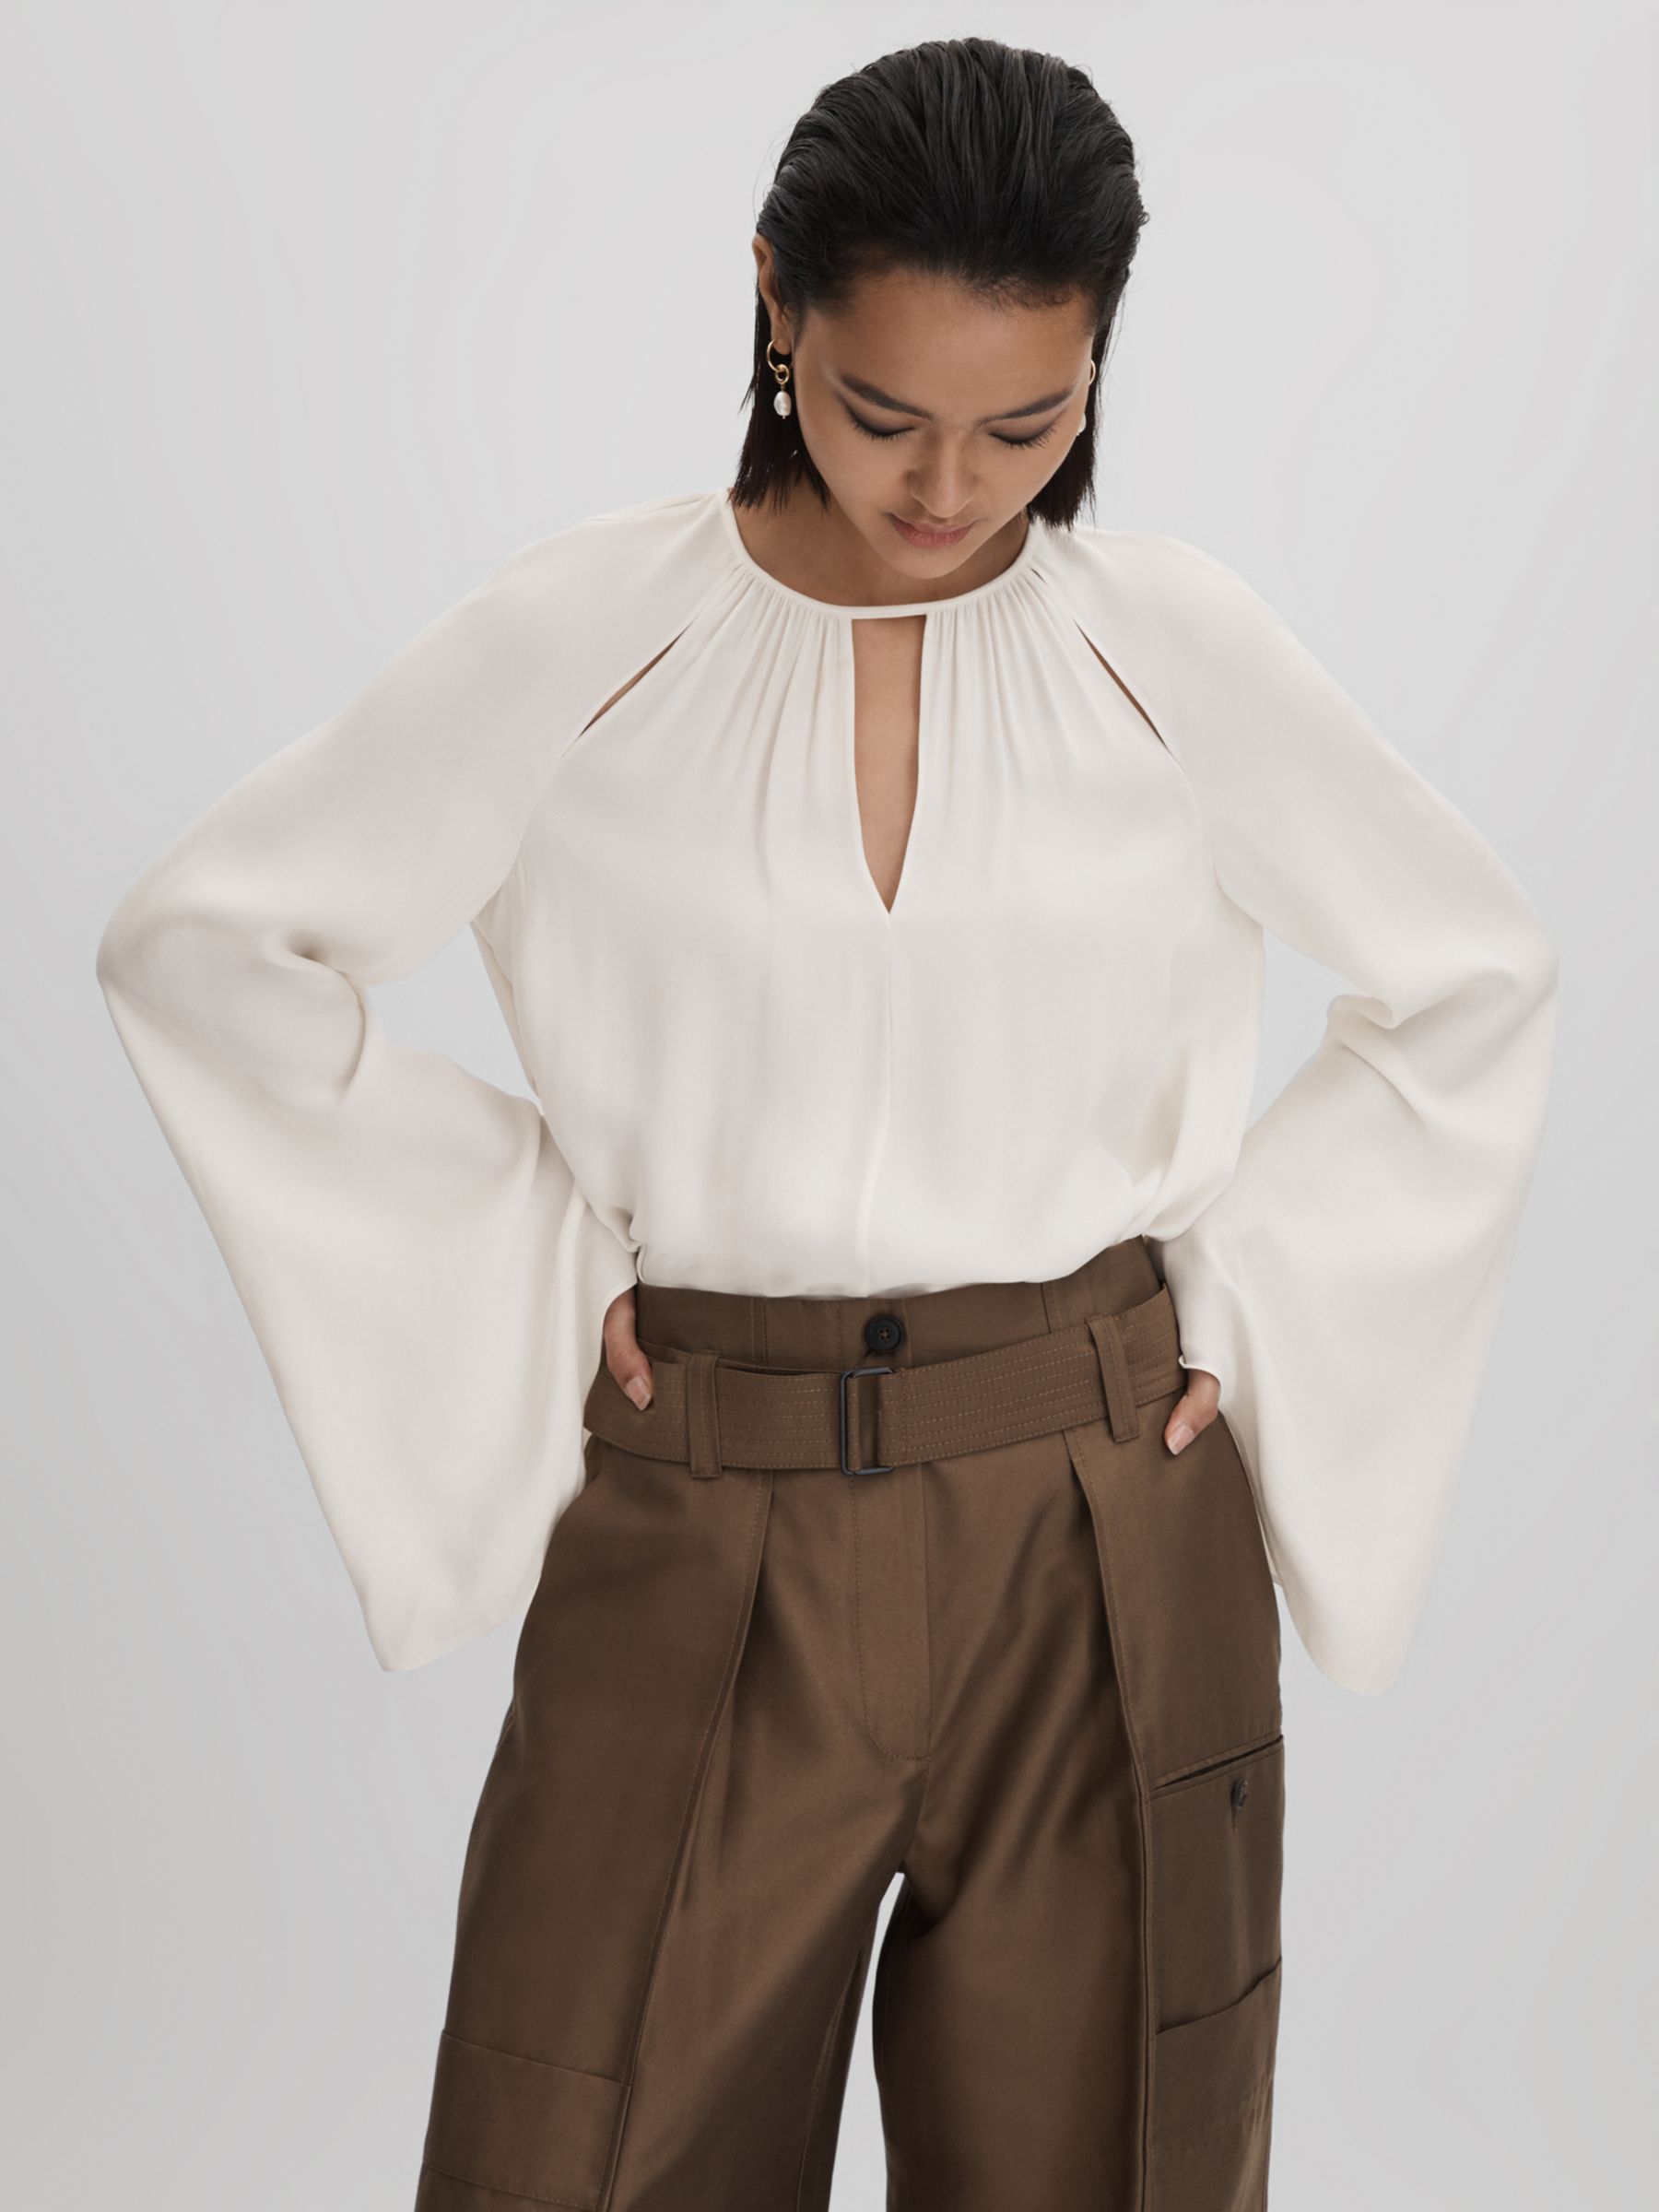 Reiss Gracie Cut Out Detail Blouse, Ivory at John Lewis & Partners